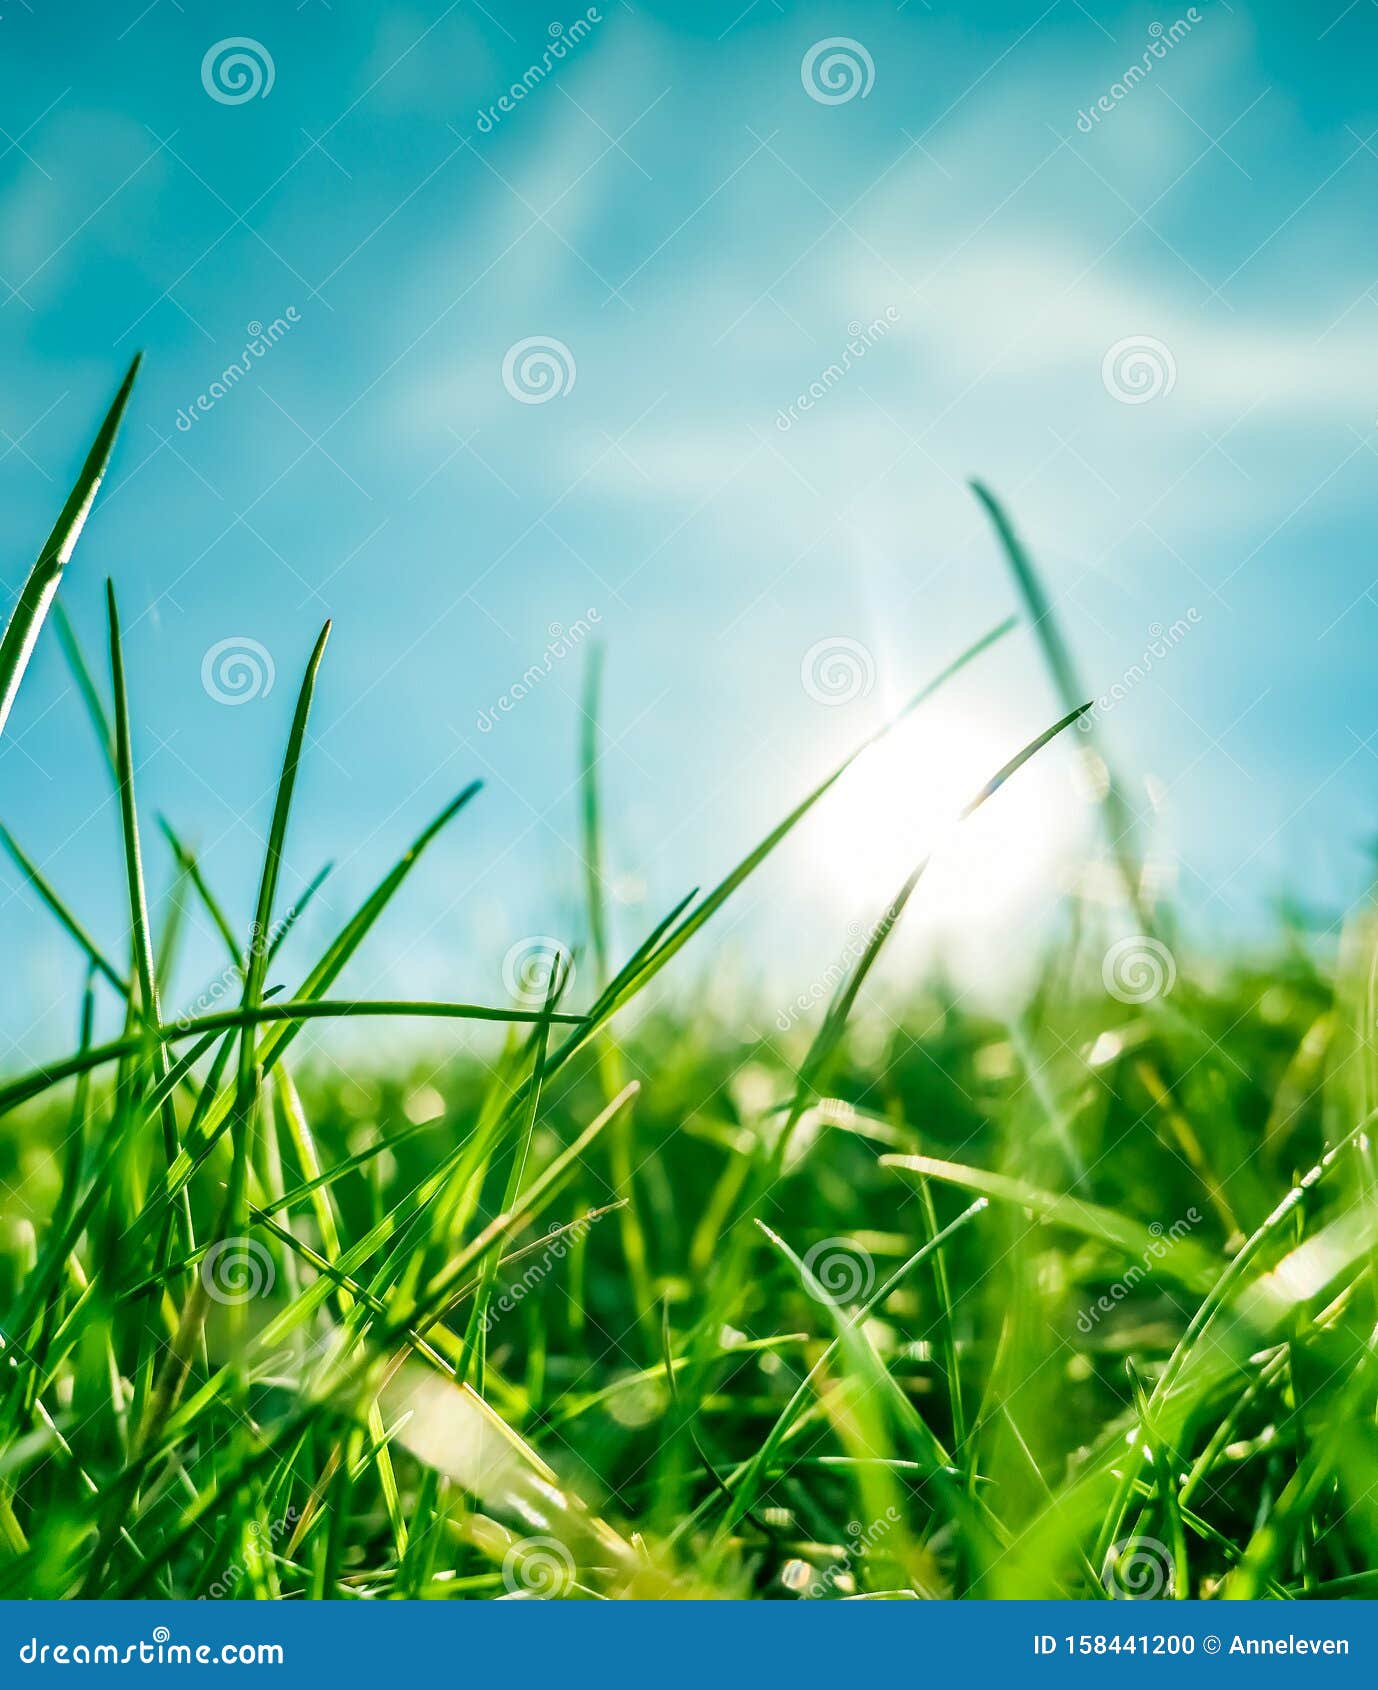 Fresh Grass And Sunny Blue Sky On A Green Field At Sunrise, Nature Of